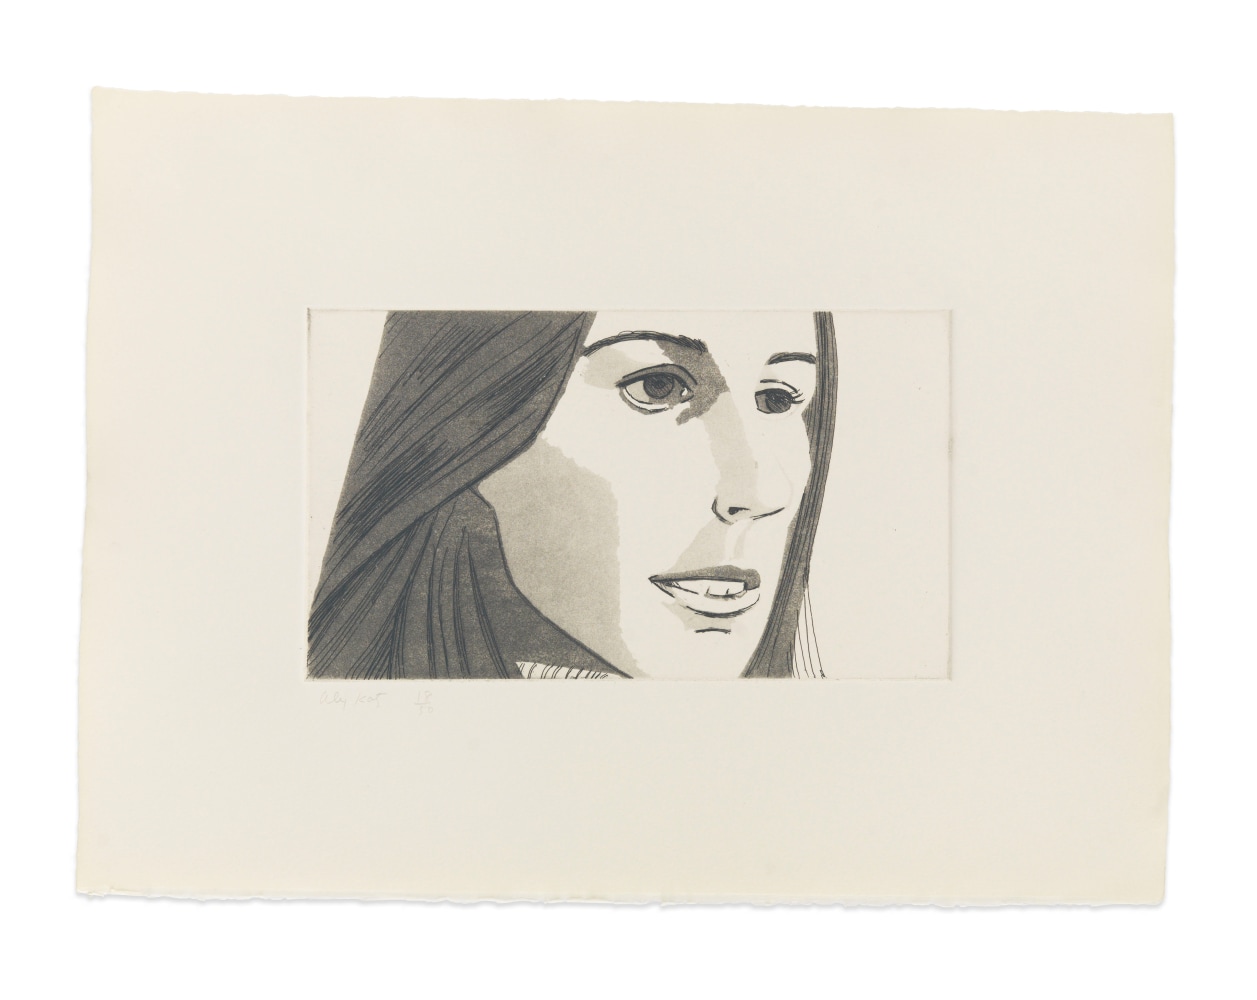 Aquatint by Alex Katz of a portrait of a woman at 3/4 view featuring her mouth slightly open and showing her top teeth